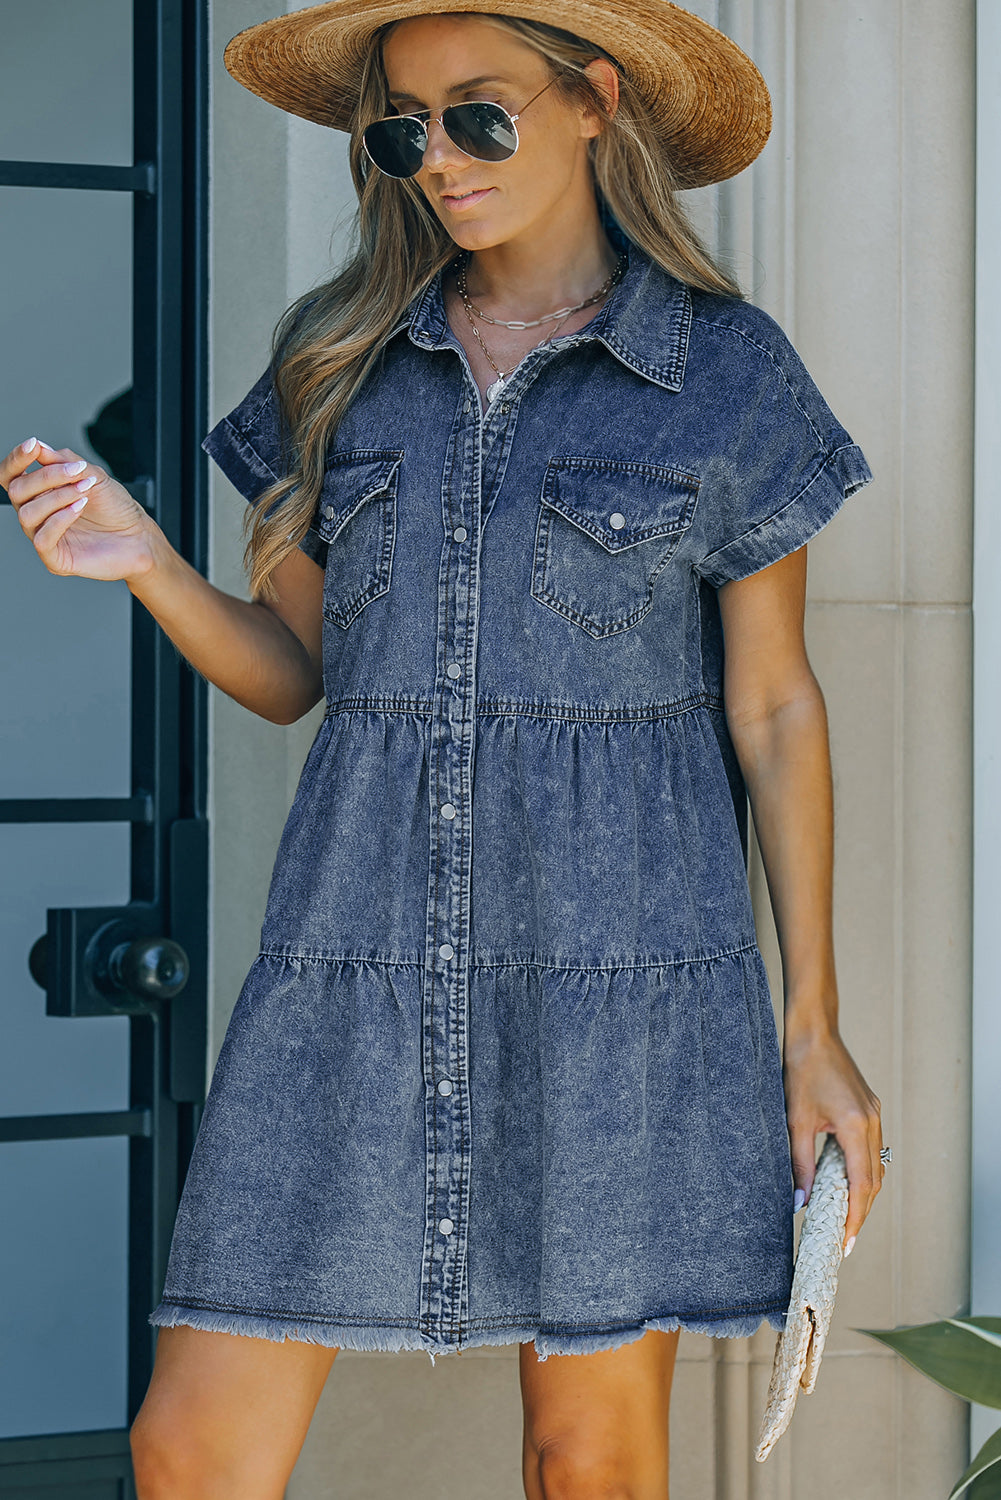 Decked Out in Denim Dress